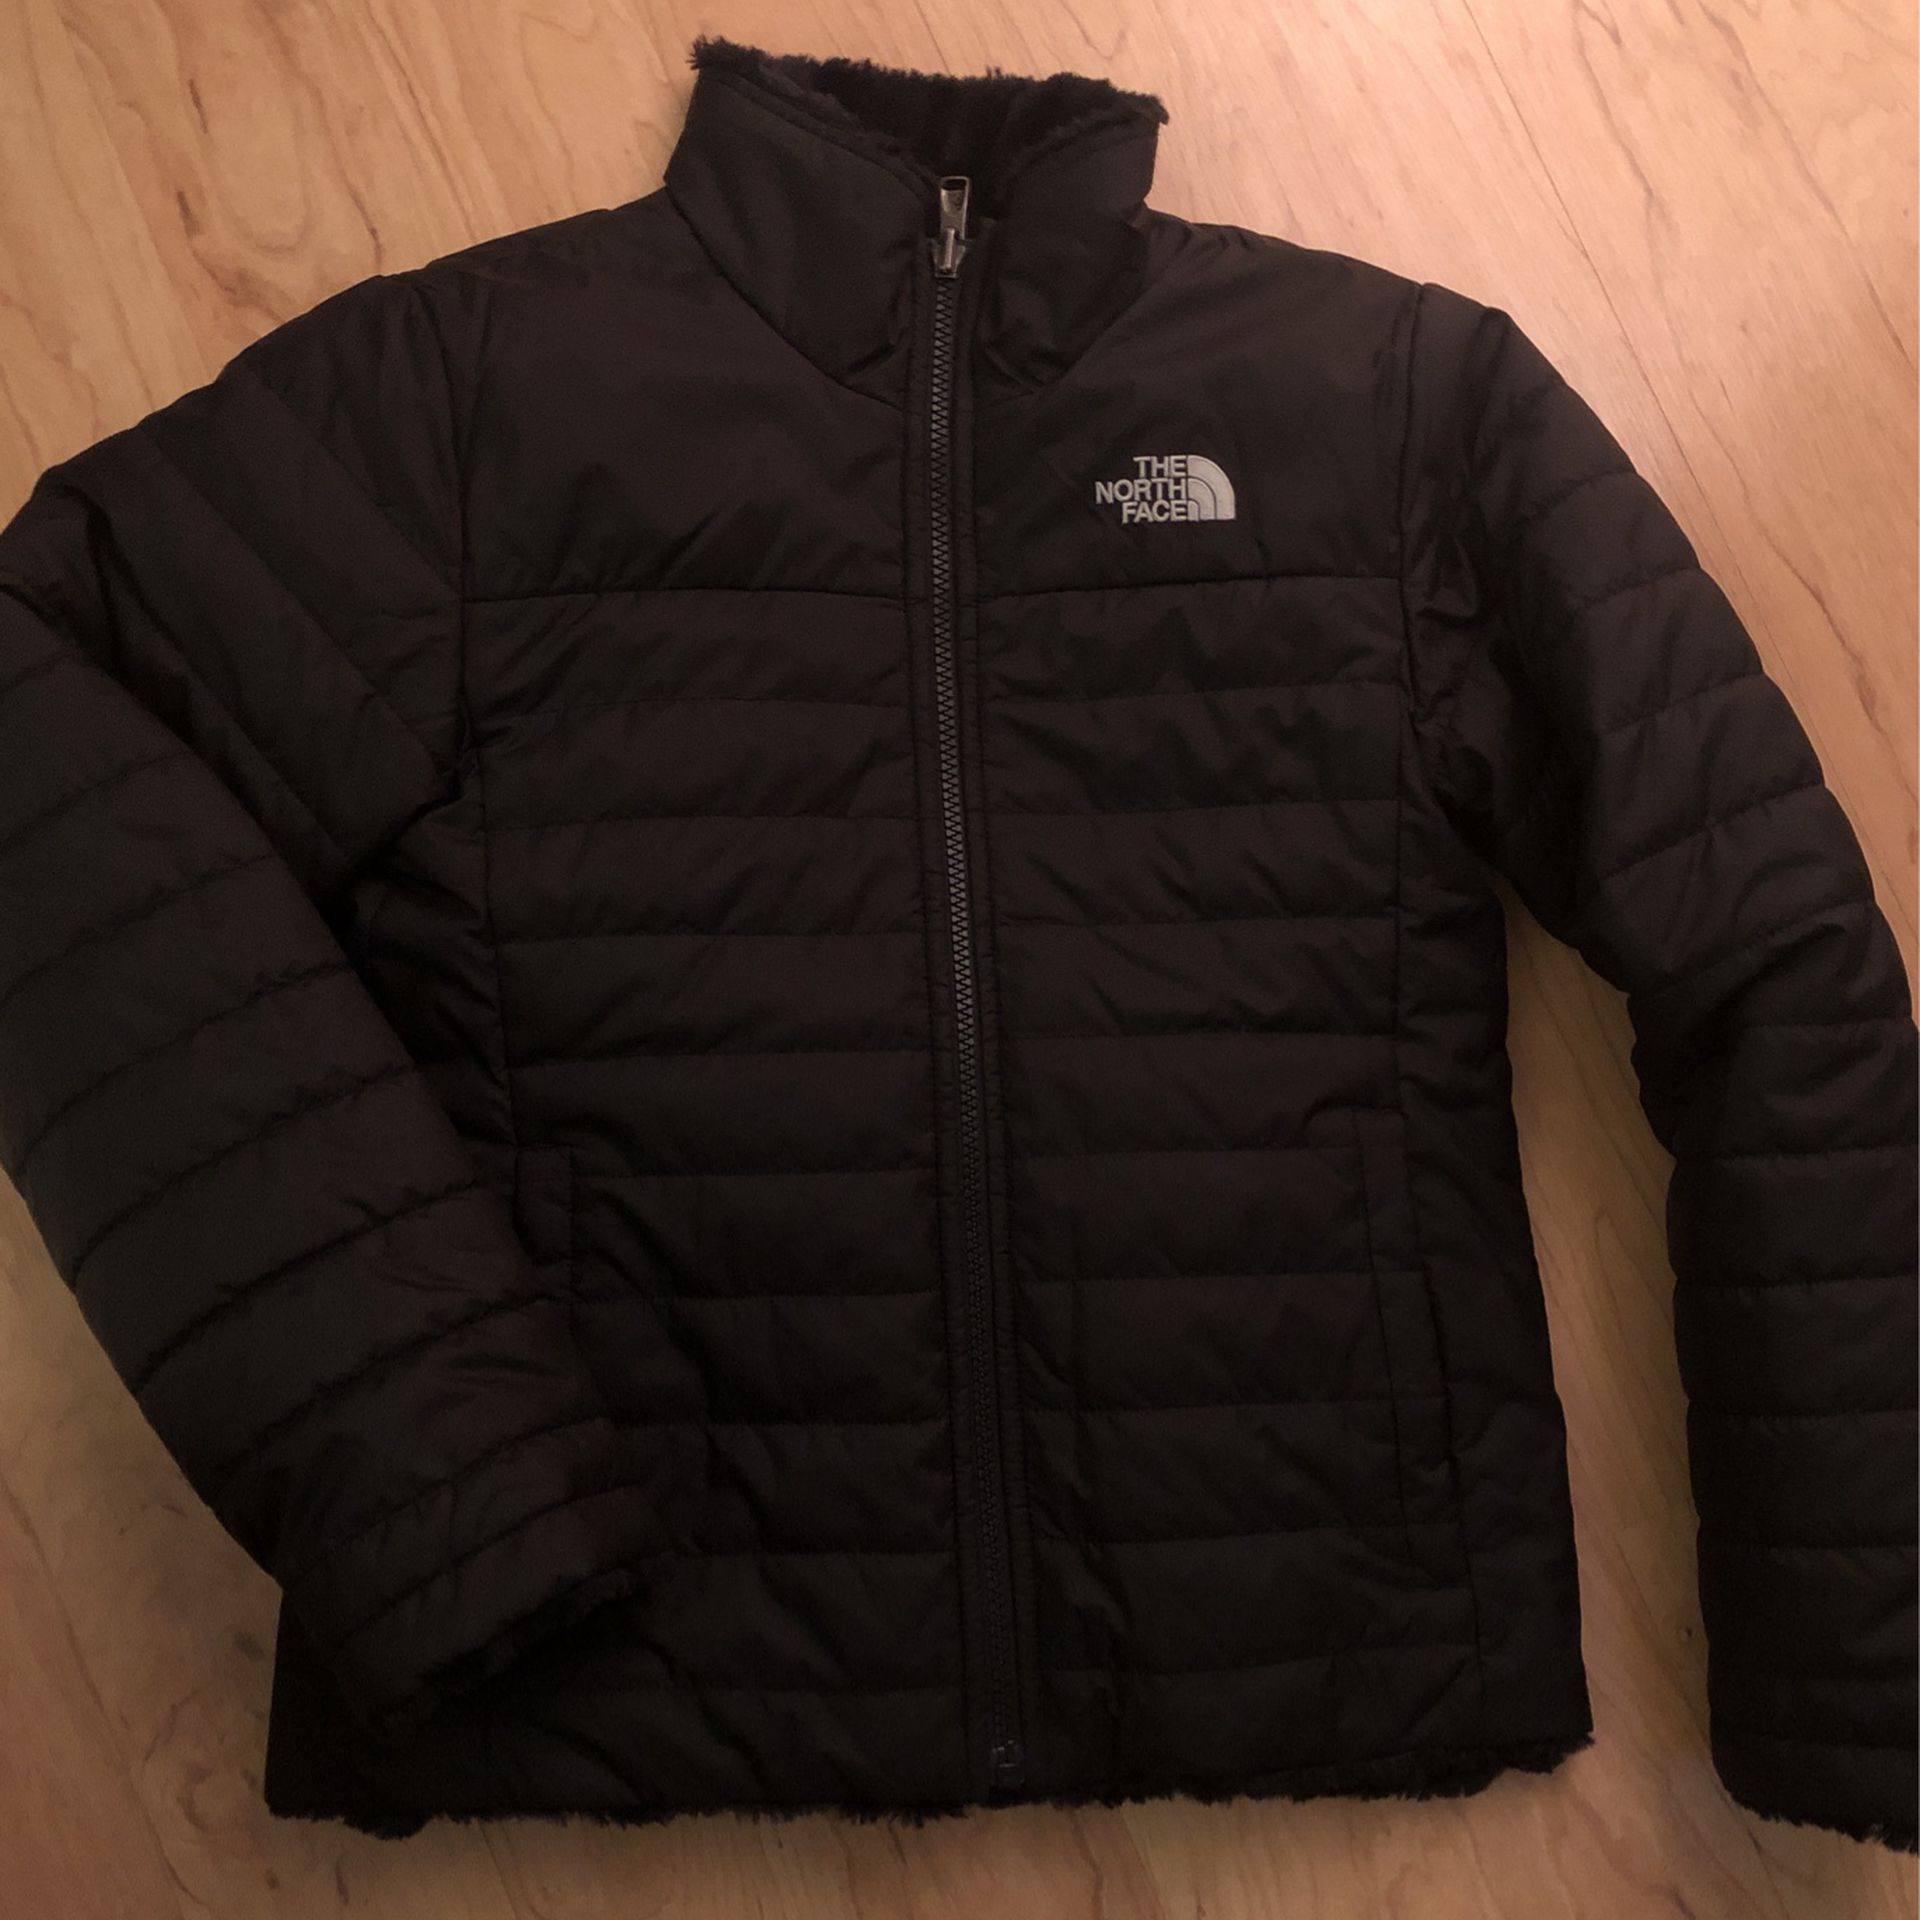  Like New Girls North face Jacket Size Small